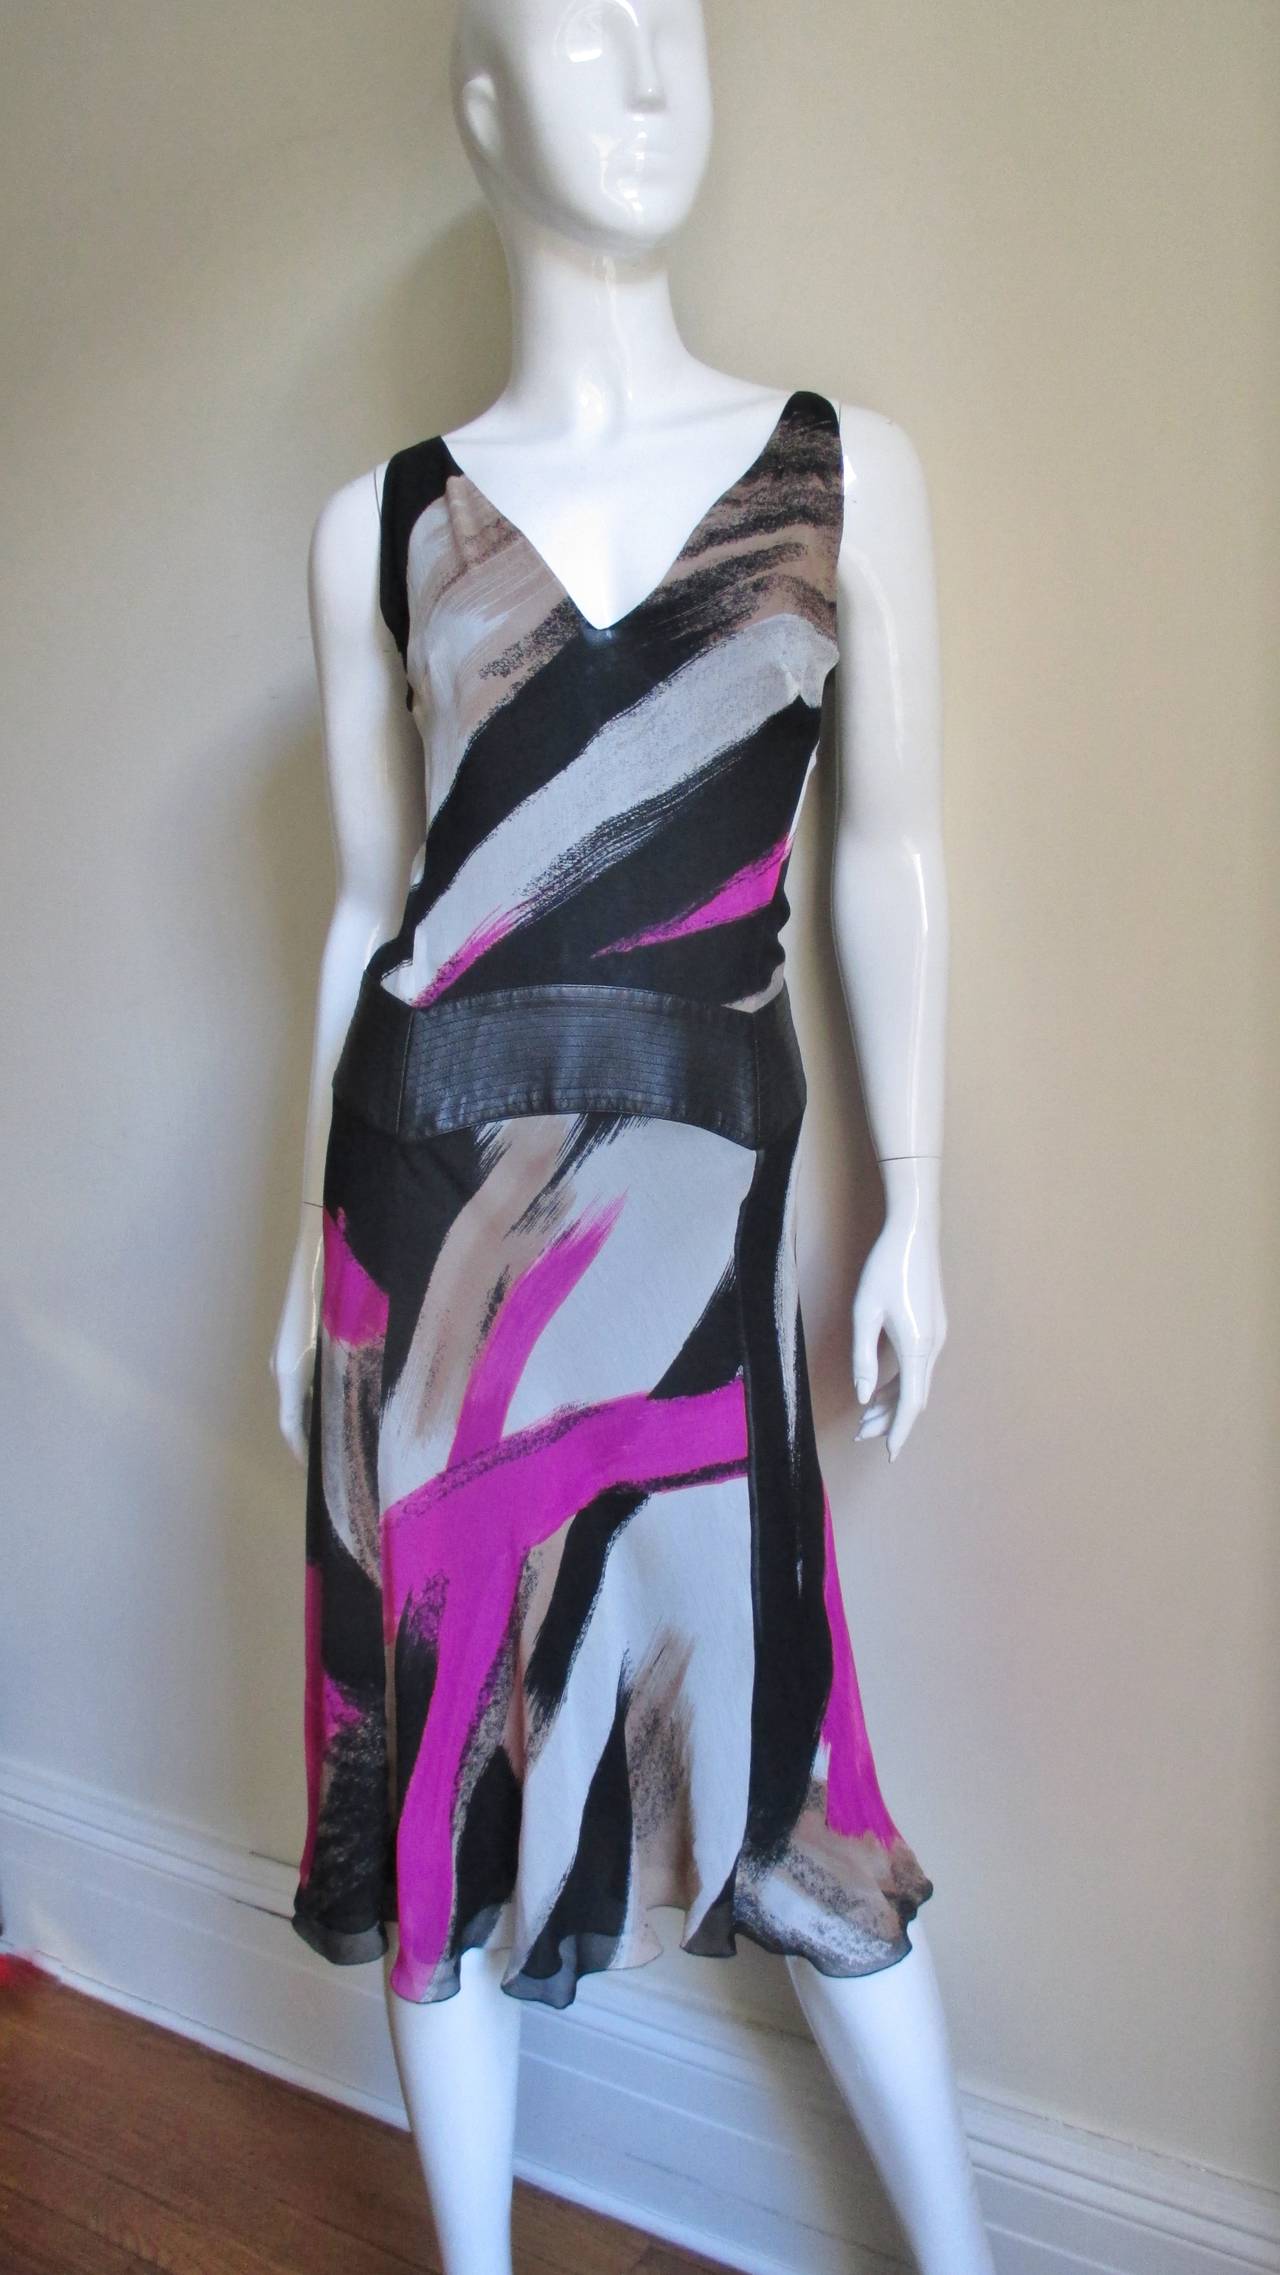 A beautiful silk dress from Gianni Versace in an abstract bright pink, taupe, black and white print.  It is sleeveless with a V neckline, a top stitched leather inset around the hips and a skirt flaring towards the hem. It has a side zipper and is